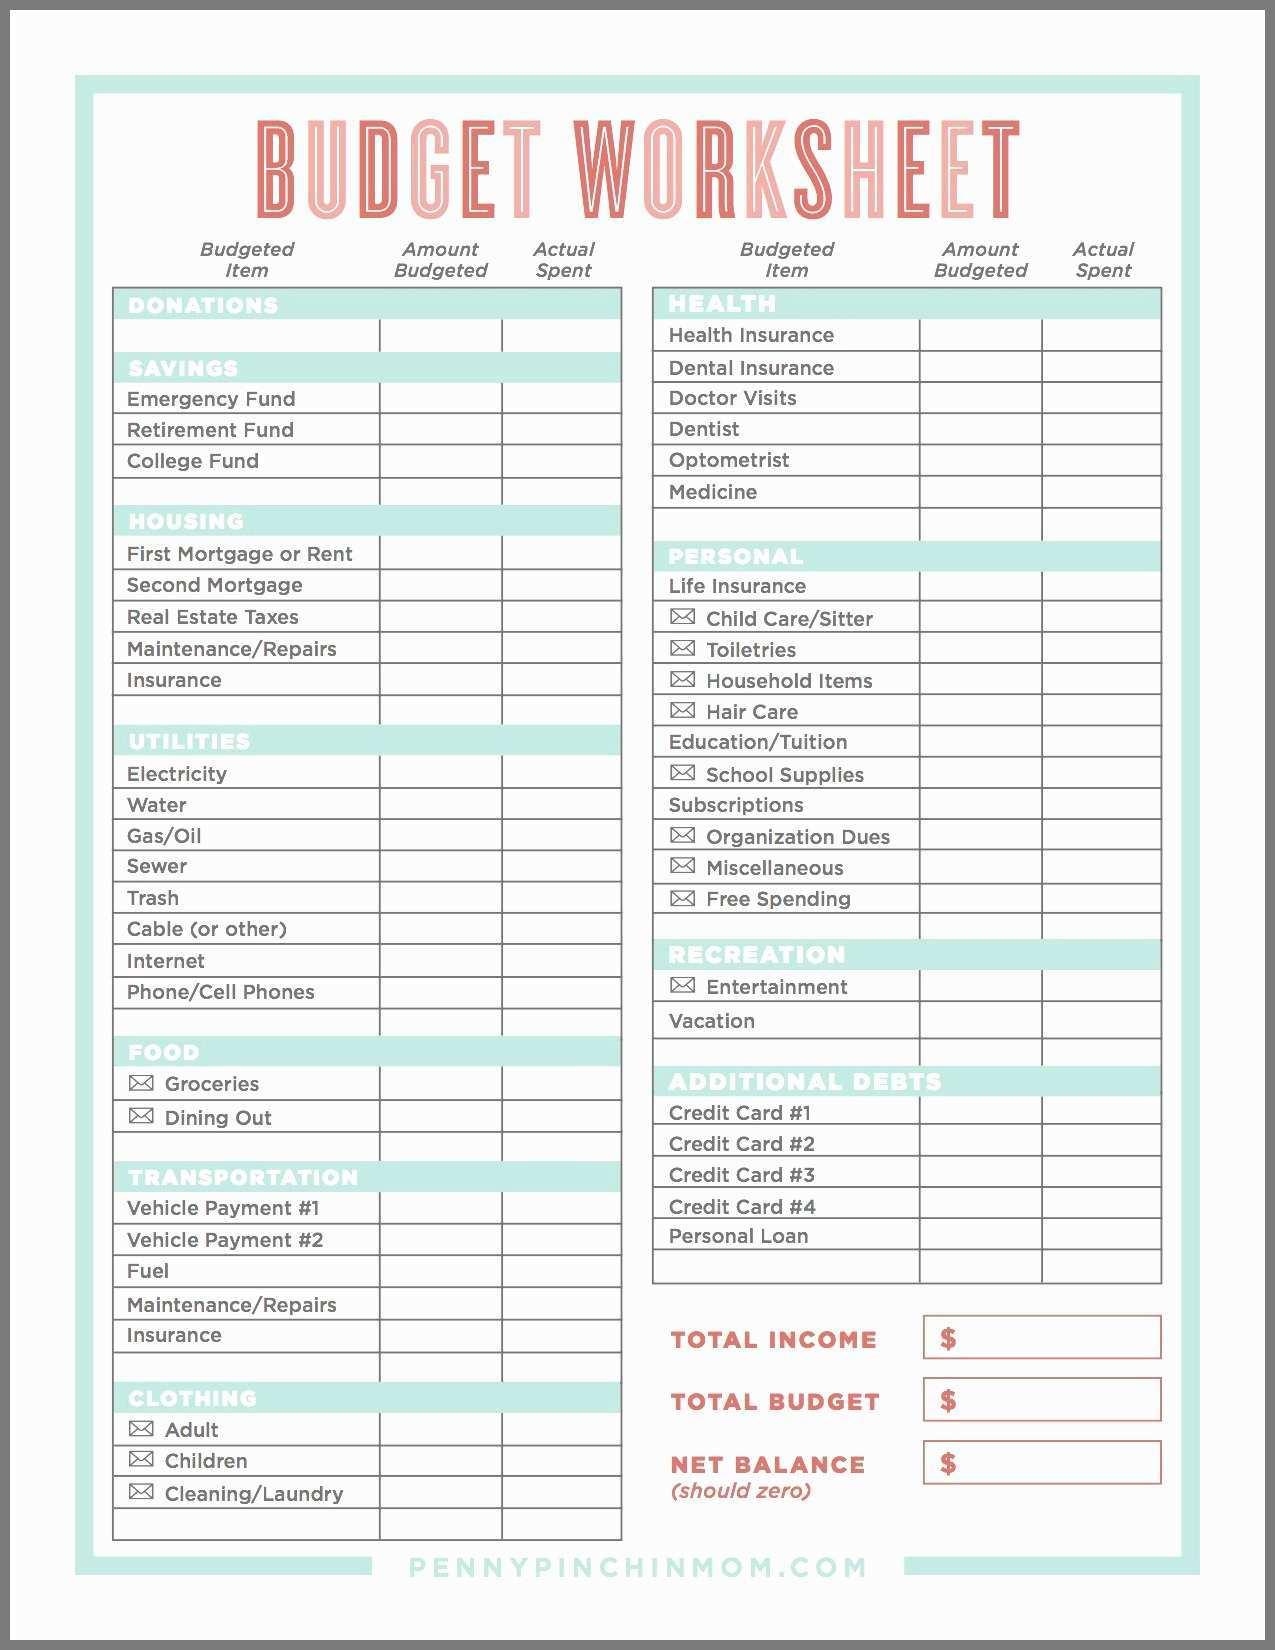 real-estate-agent-budget-spreadsheet-intended-for-how-to-create-a